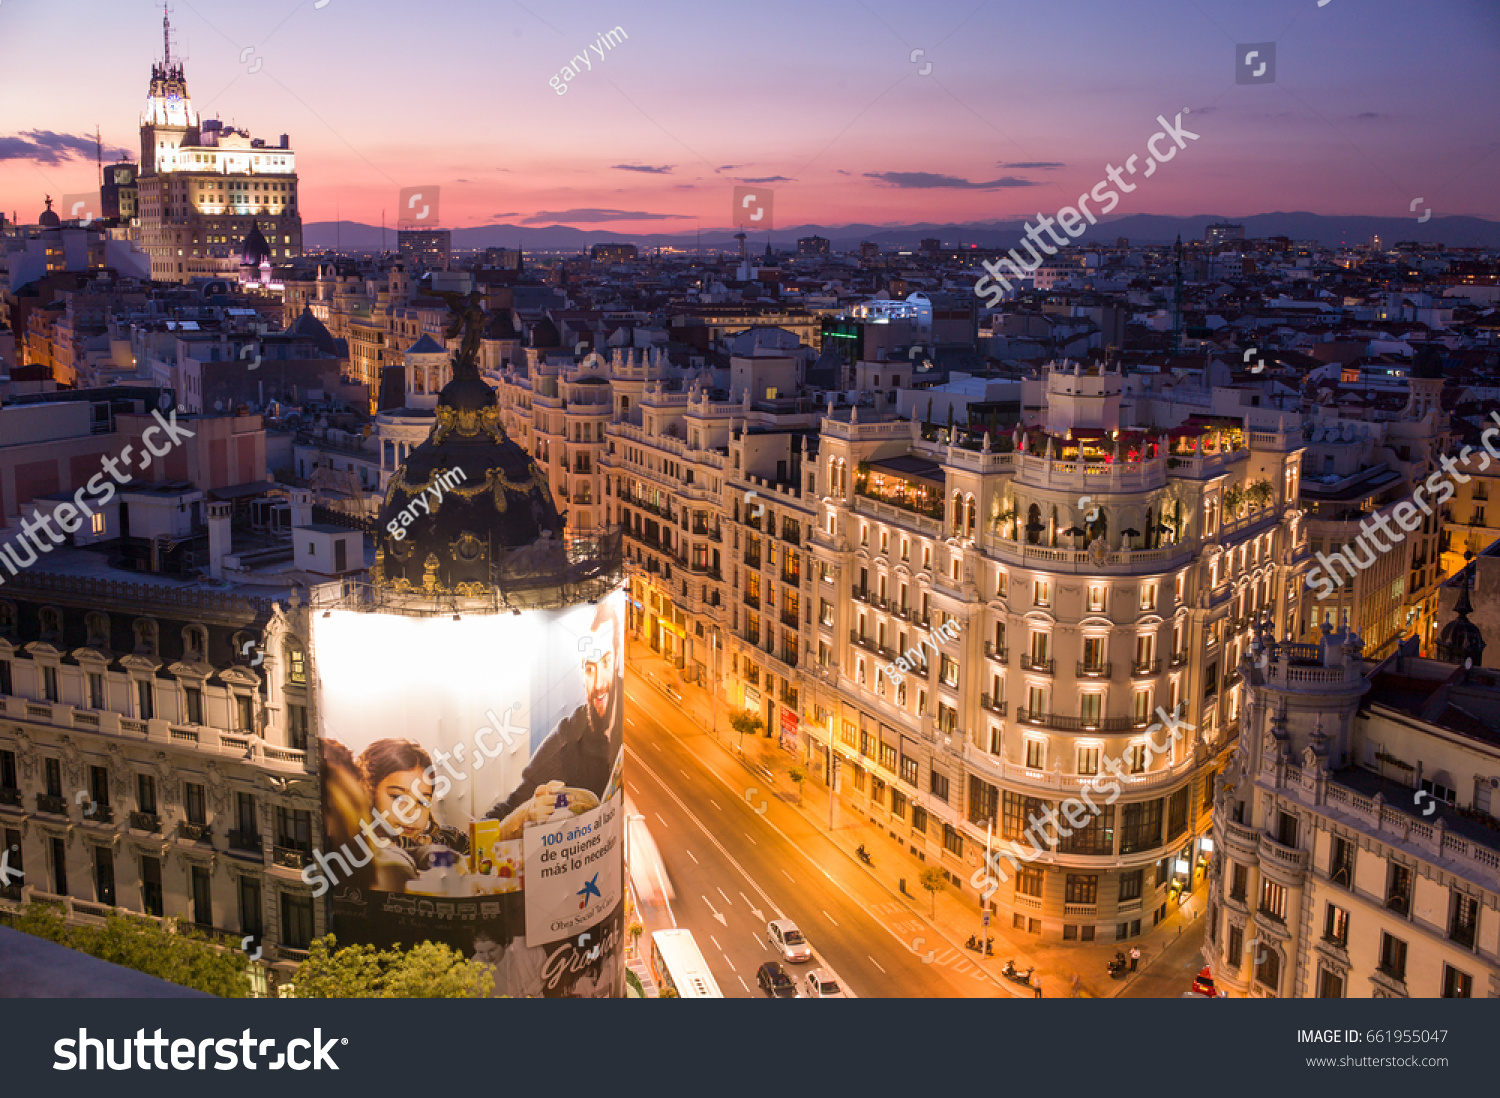 Madrid, Spain - September 29 2015: The sunset view of commercial buildings on Gran Via, where busiest street in the city. #661955047